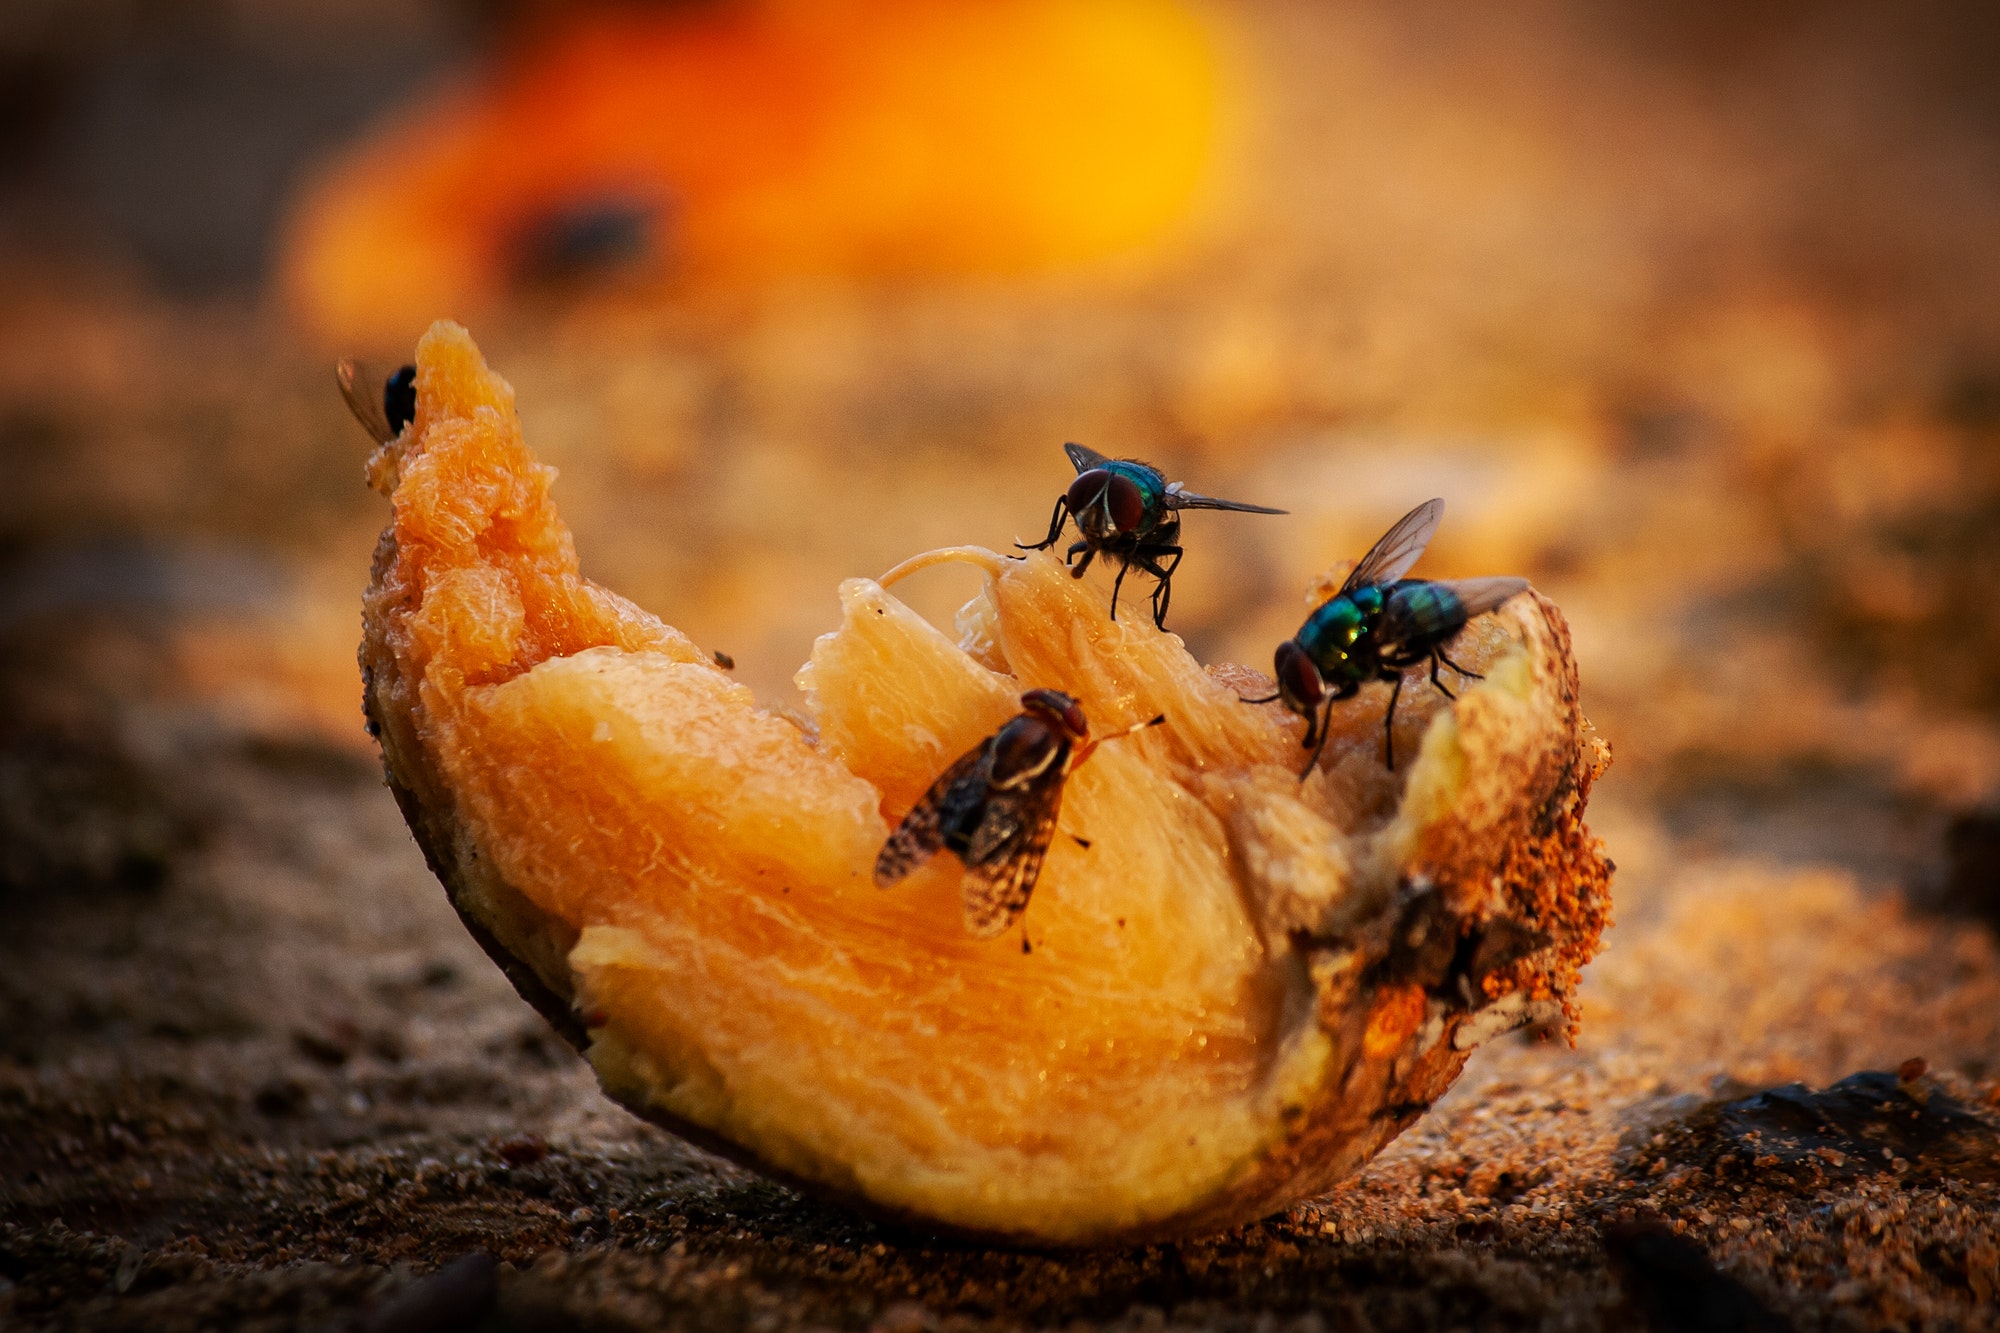 Do flies really vomit on food when they land? — Velvet’s student essay